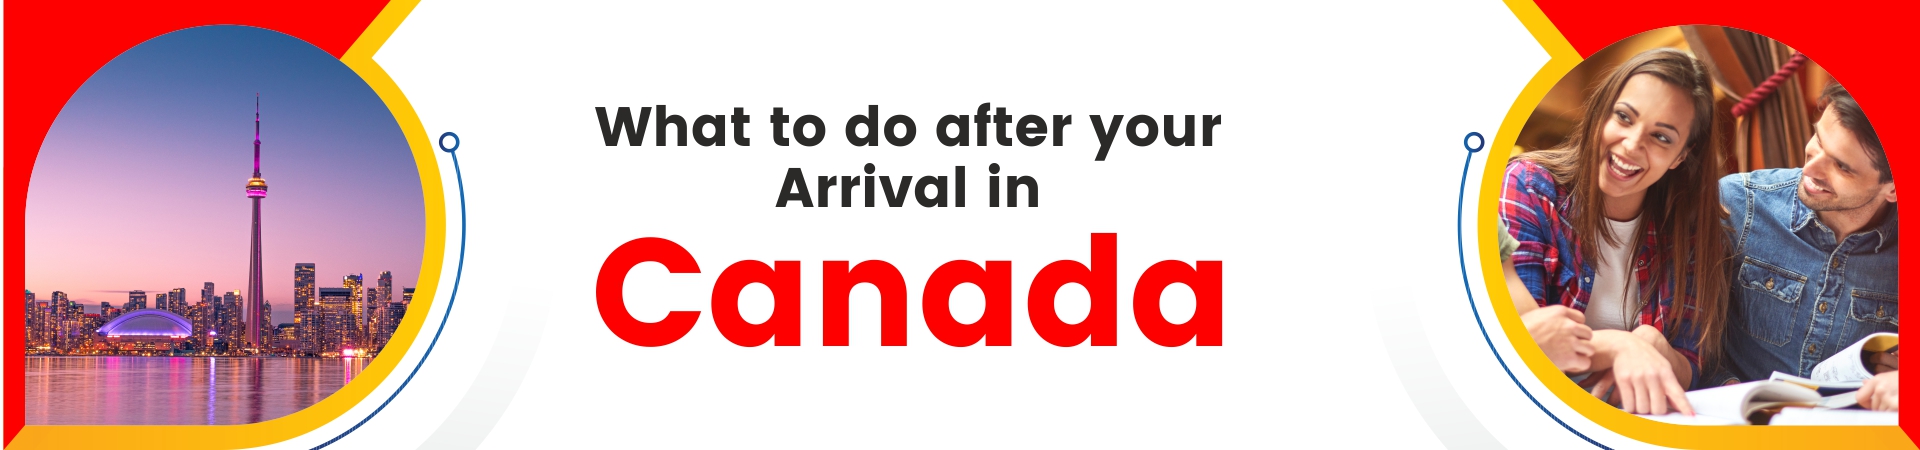 What to do after Arrival in Canada